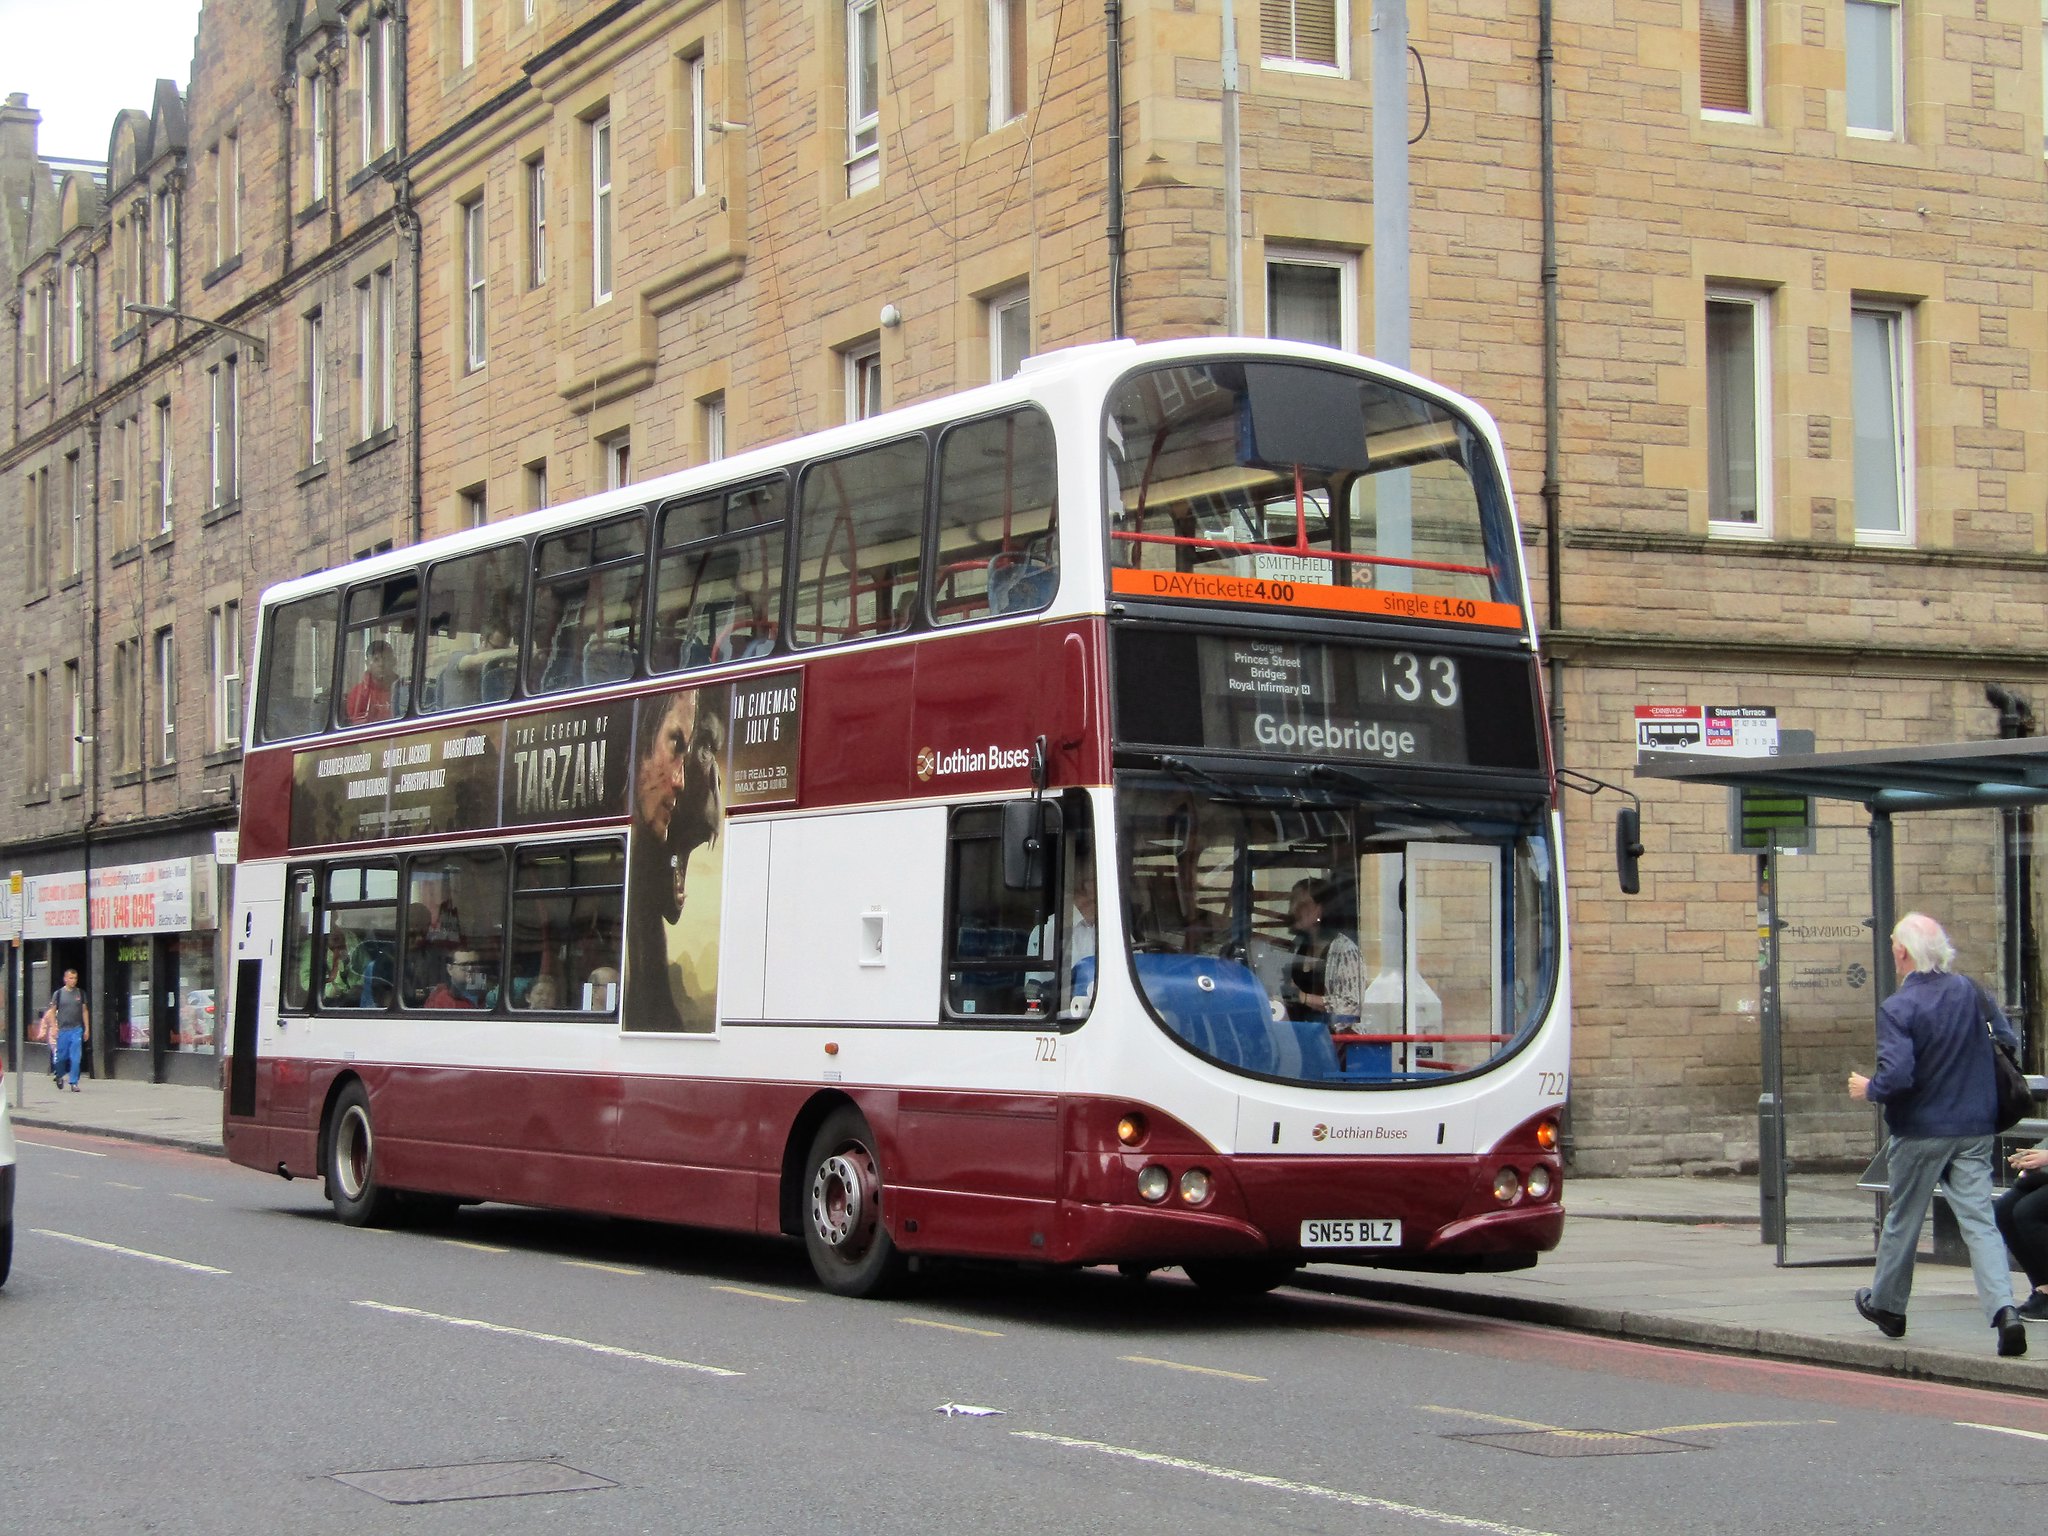 Double-decker Lothian bus waiting at bus stop for passengers to board.